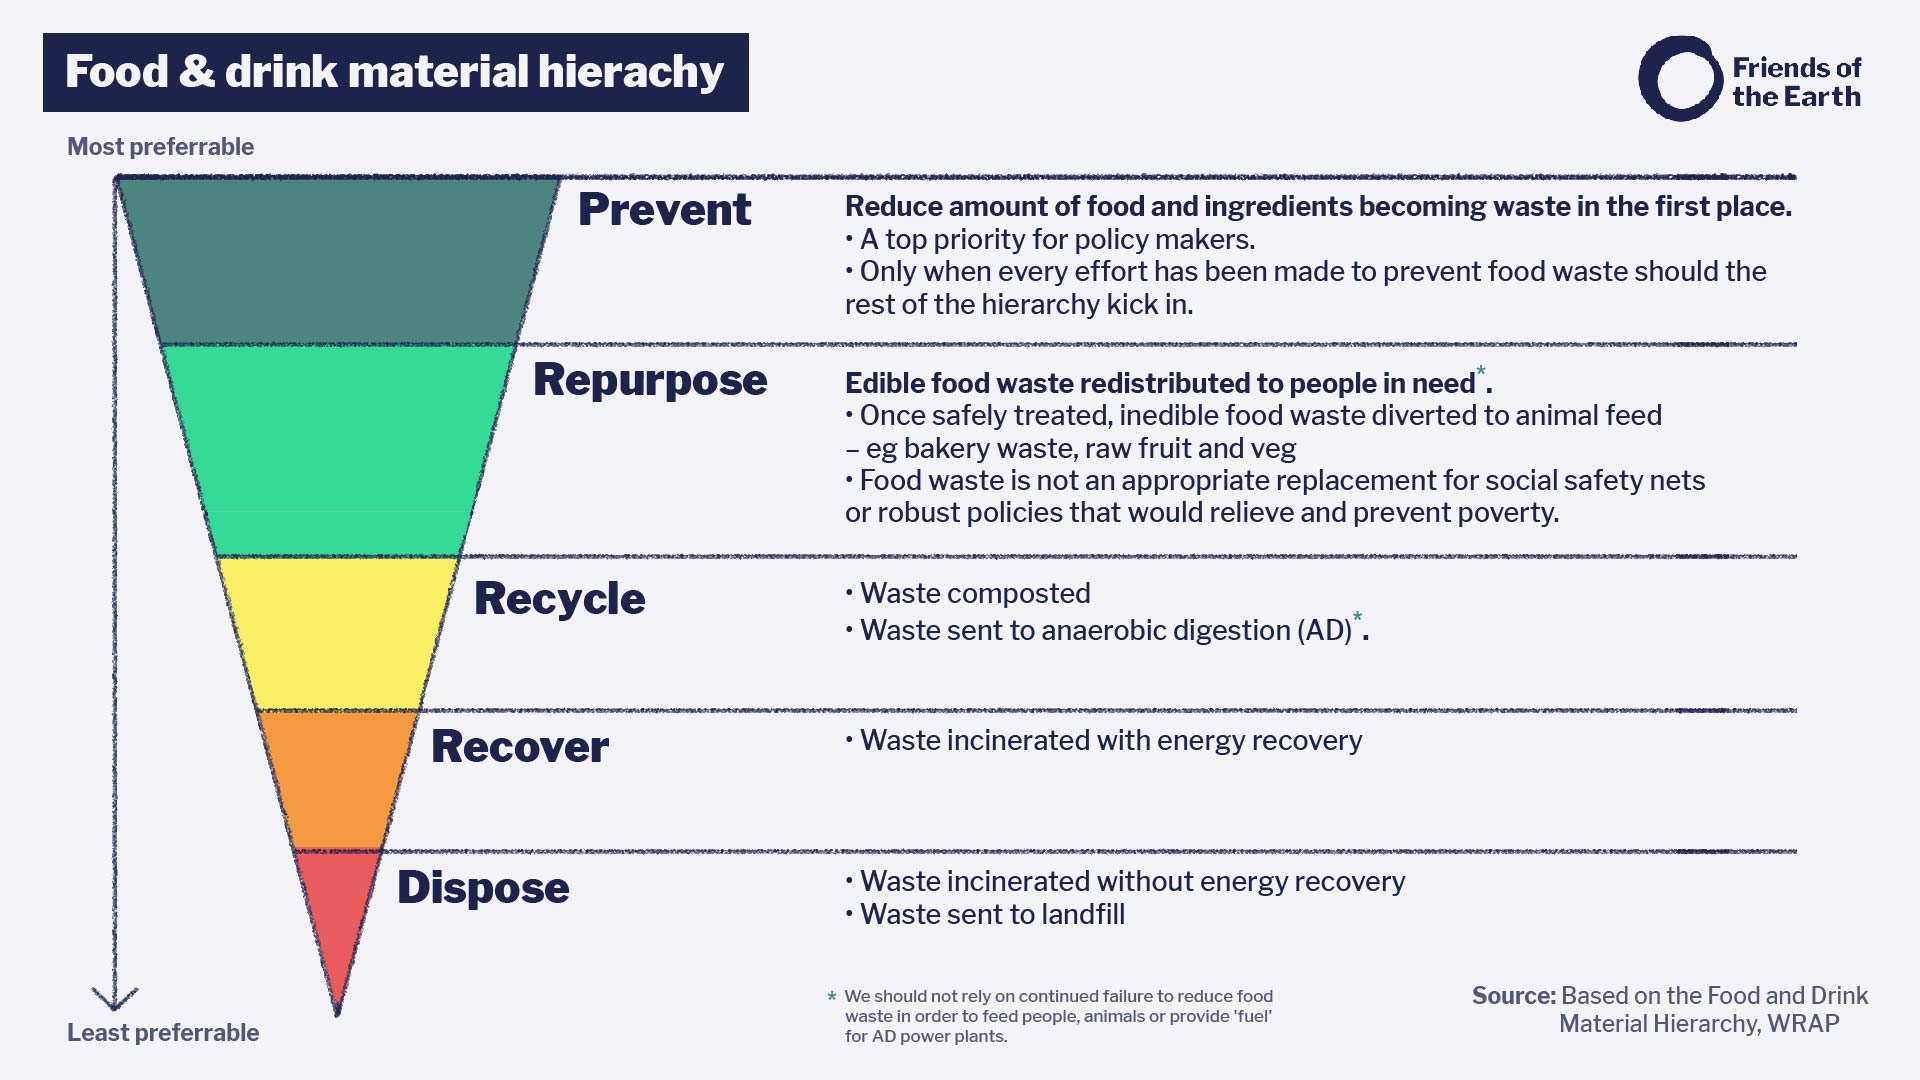 Food waste should first be prevented, then repurposed, then recycled, recovered and finally if none of these can be achieved, disposed of.